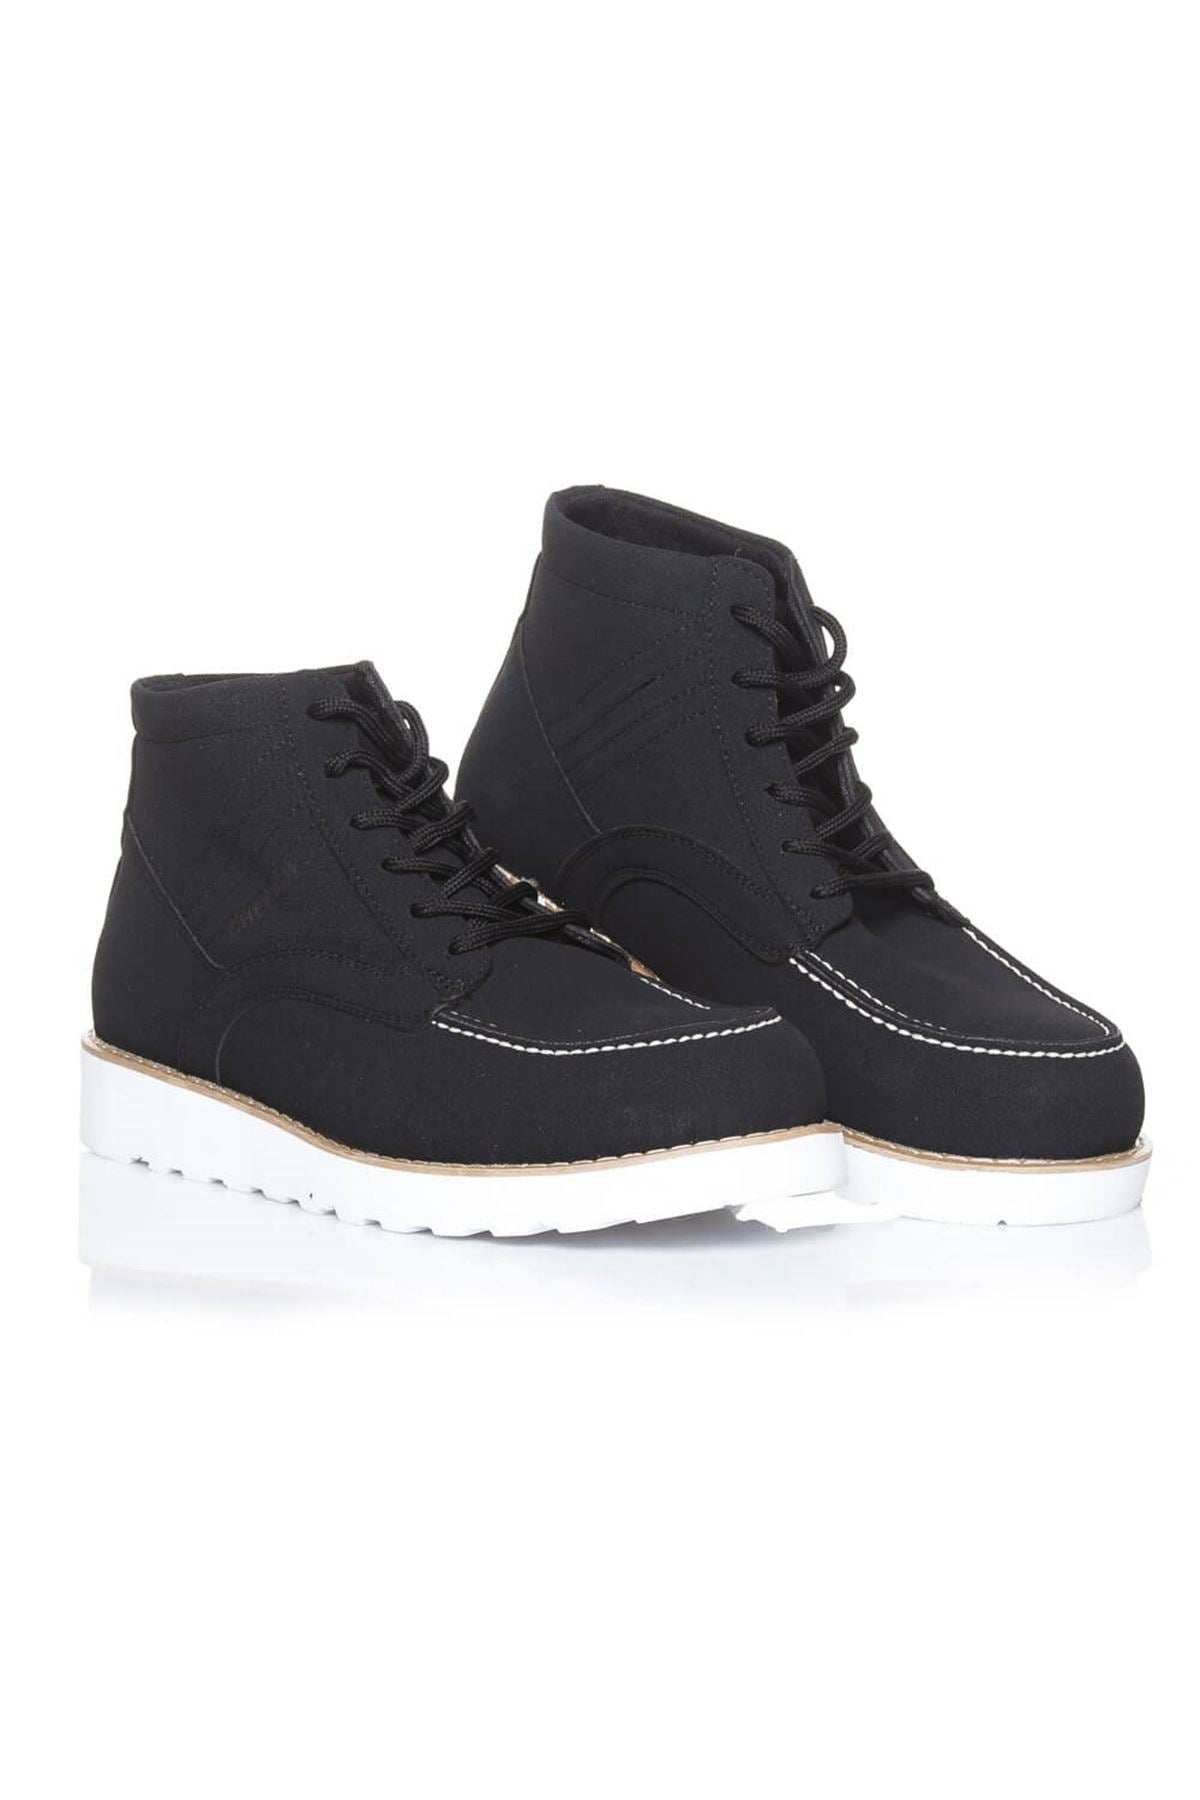 CH047 Men's Black-White Sole Lace-Up Sneaker Sports Boots - STREETMODE ™